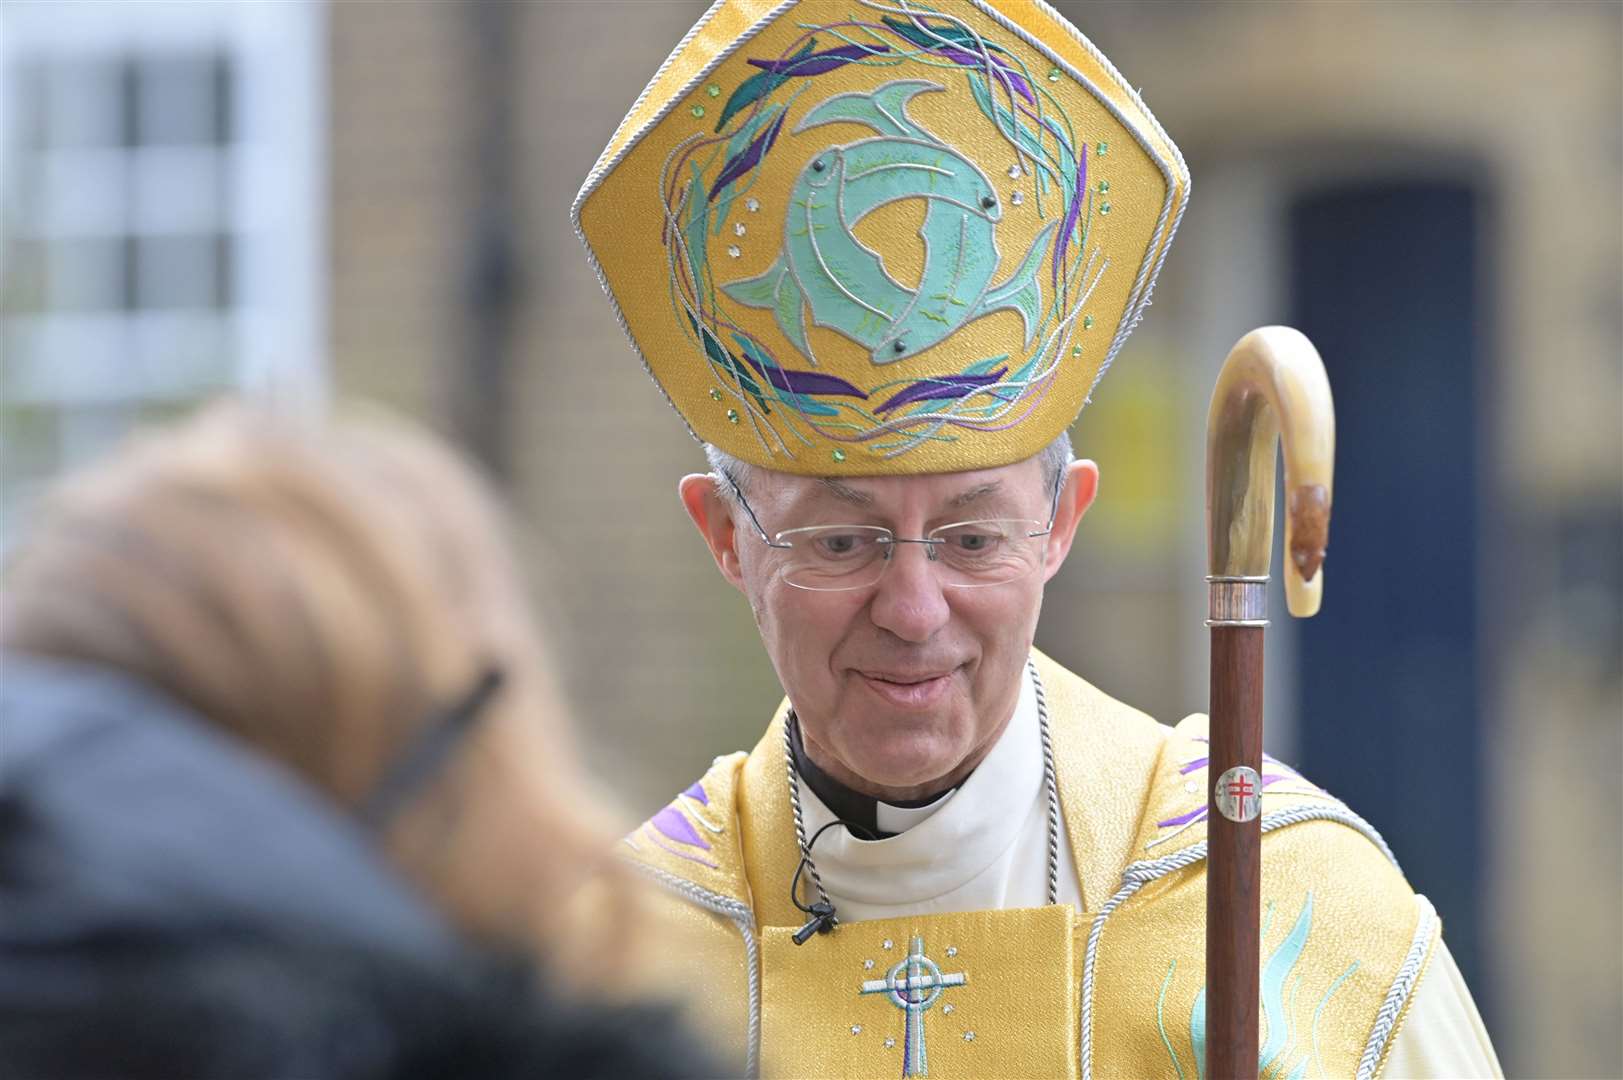 Justin Welby, the Archbishop of Canterbury, is the centre's patron